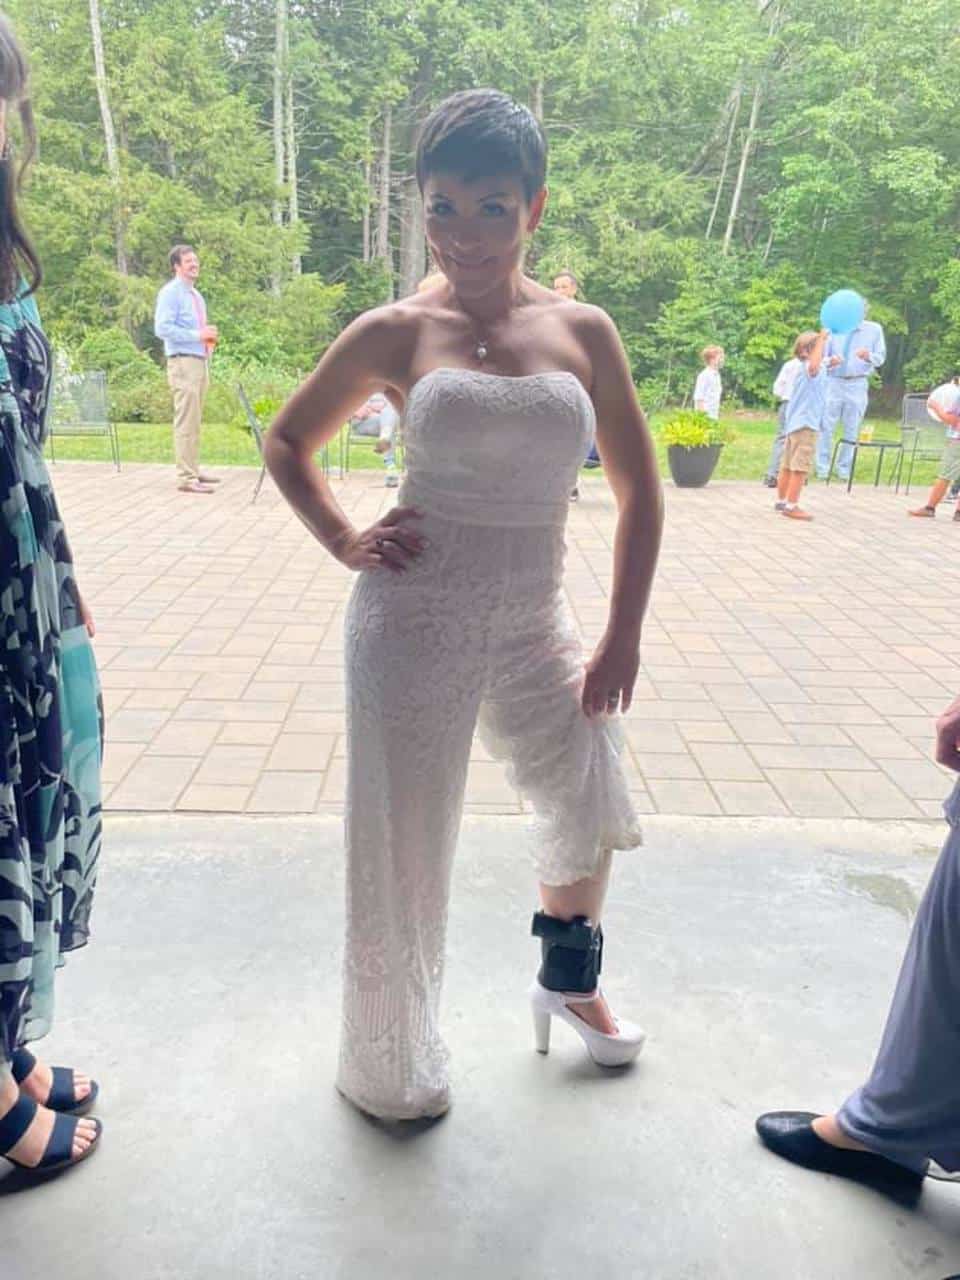 Tatiana Whitlock Carries in Wilderness Ankle Holder at Wedding